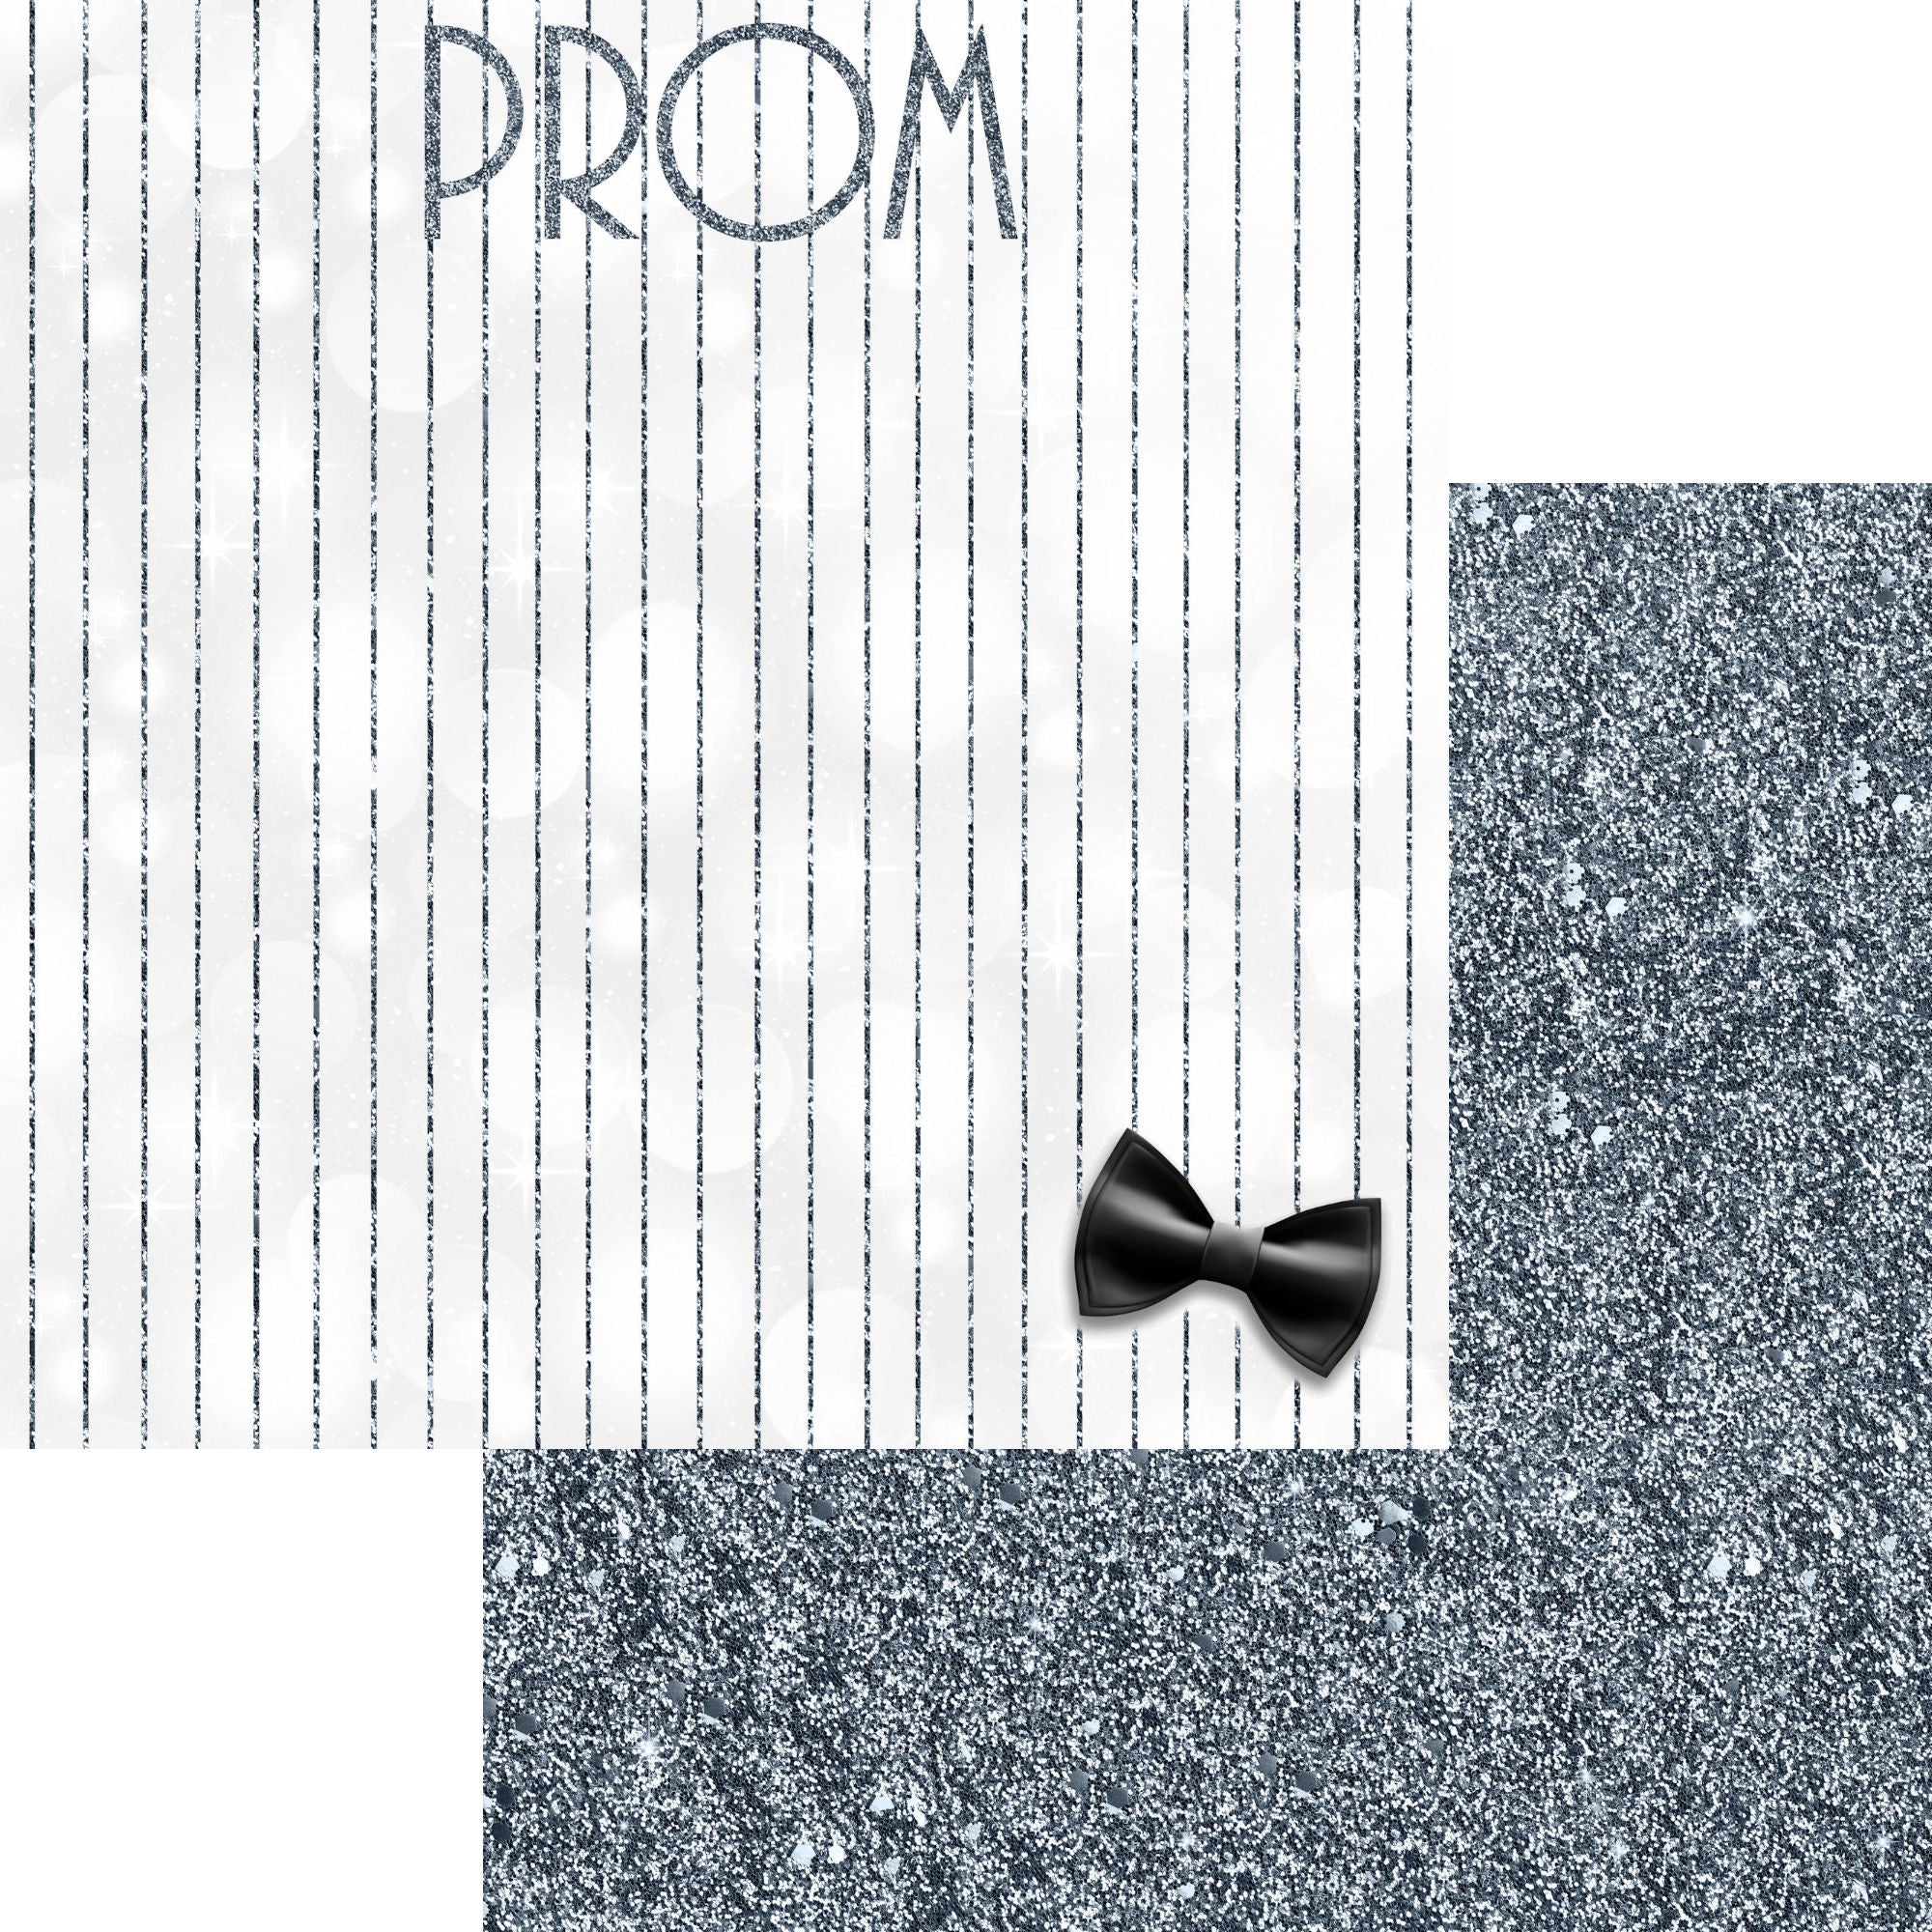 Prom Night Collection Bow Tie 12 x 12 Double-Sided Scrapbook Paper by SSC Designs